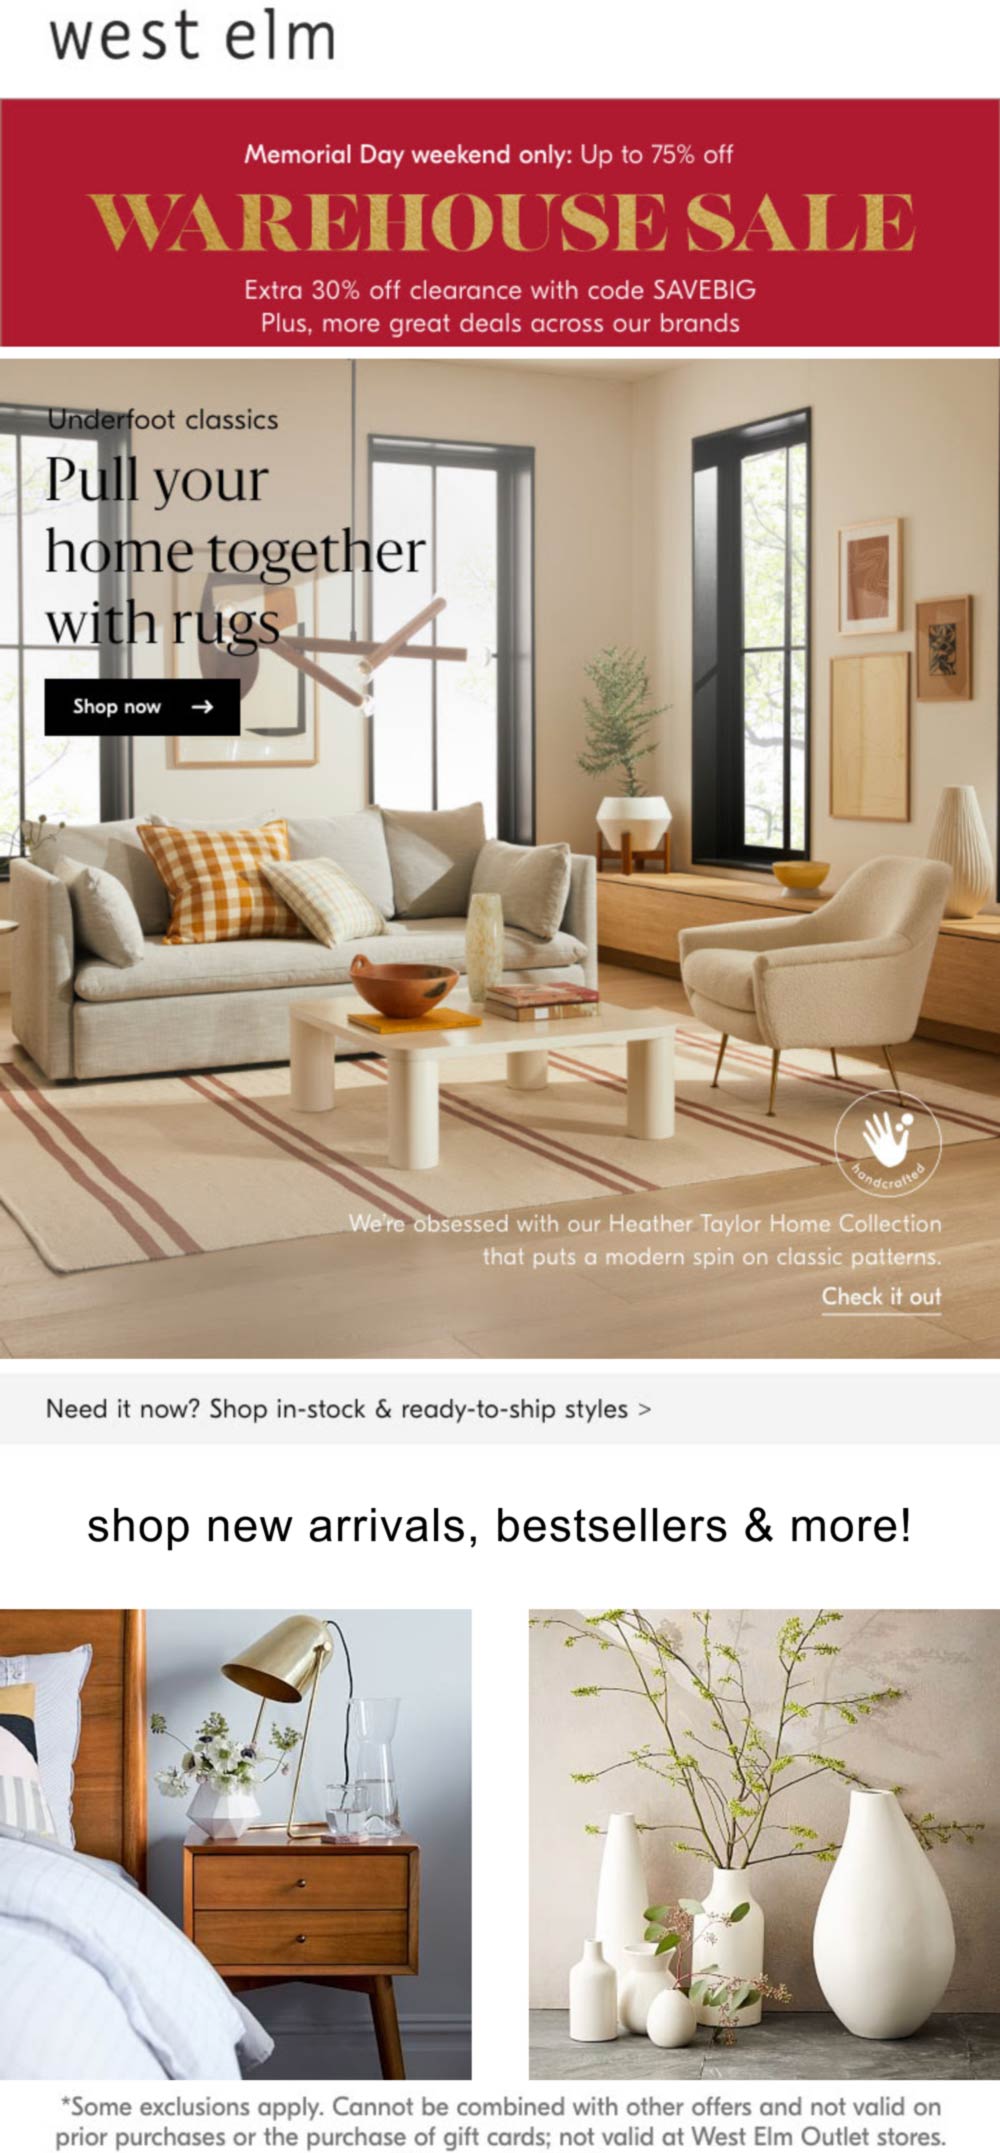 [April, 2022] Extra 30 off clearance today at West Elm furniture via